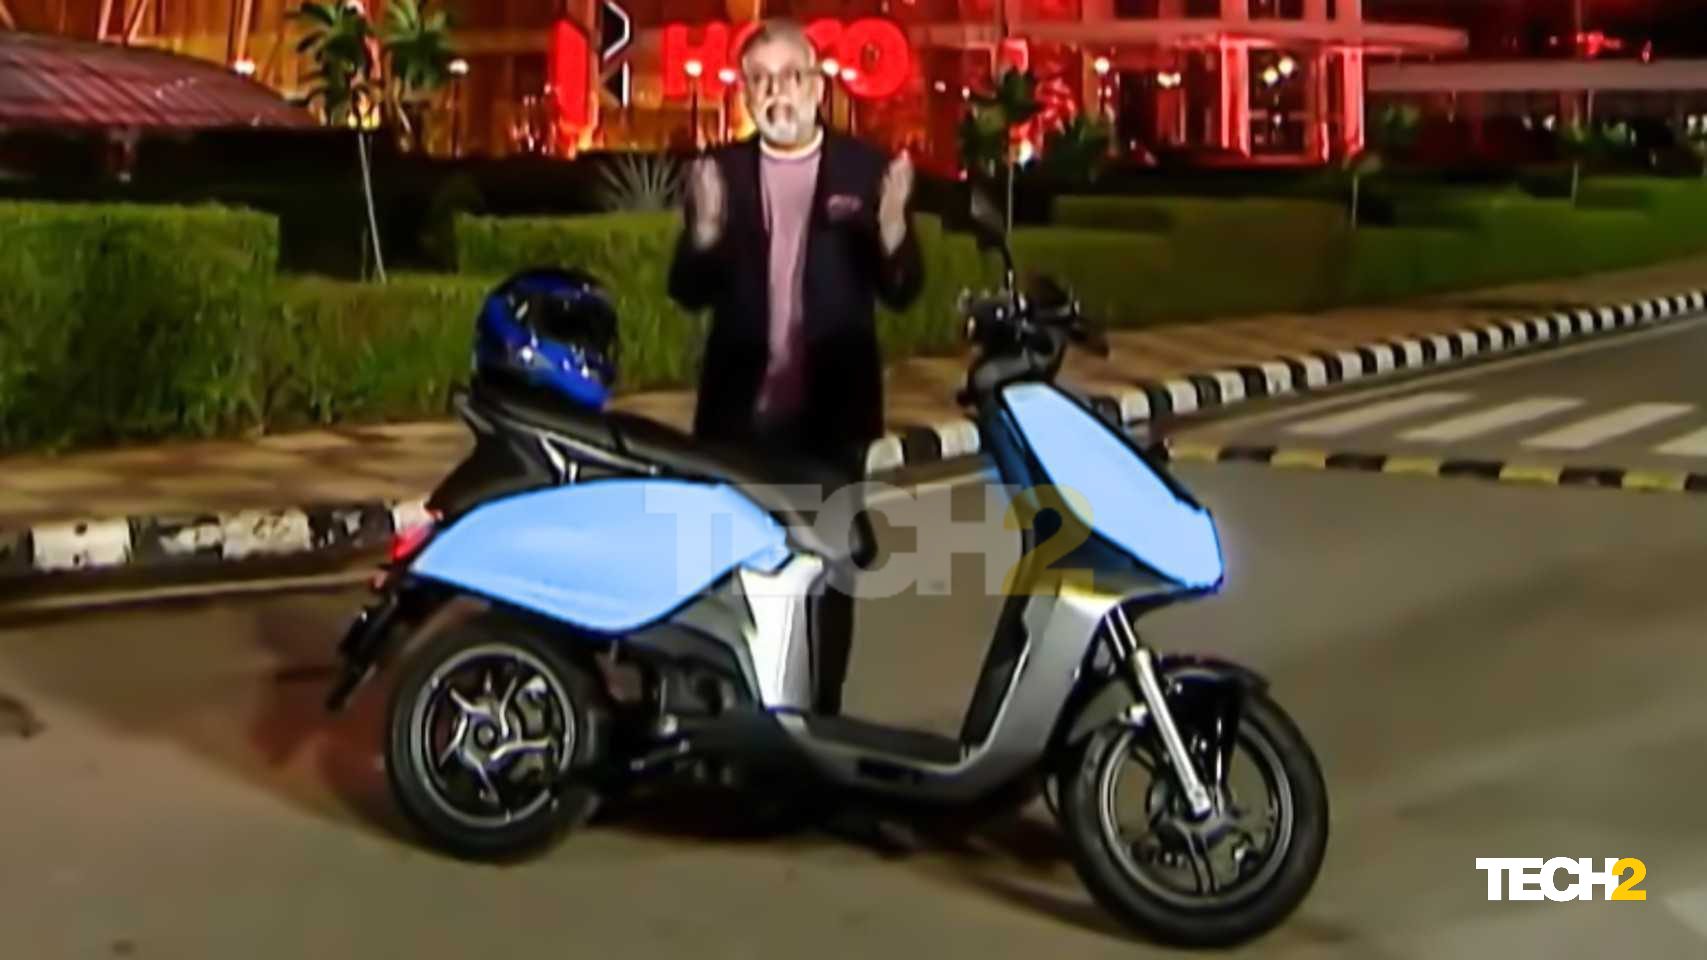 Hero MotoCorp's first electric scooter is expected to follow a fixed charging system. Image: Hero MotoCorp